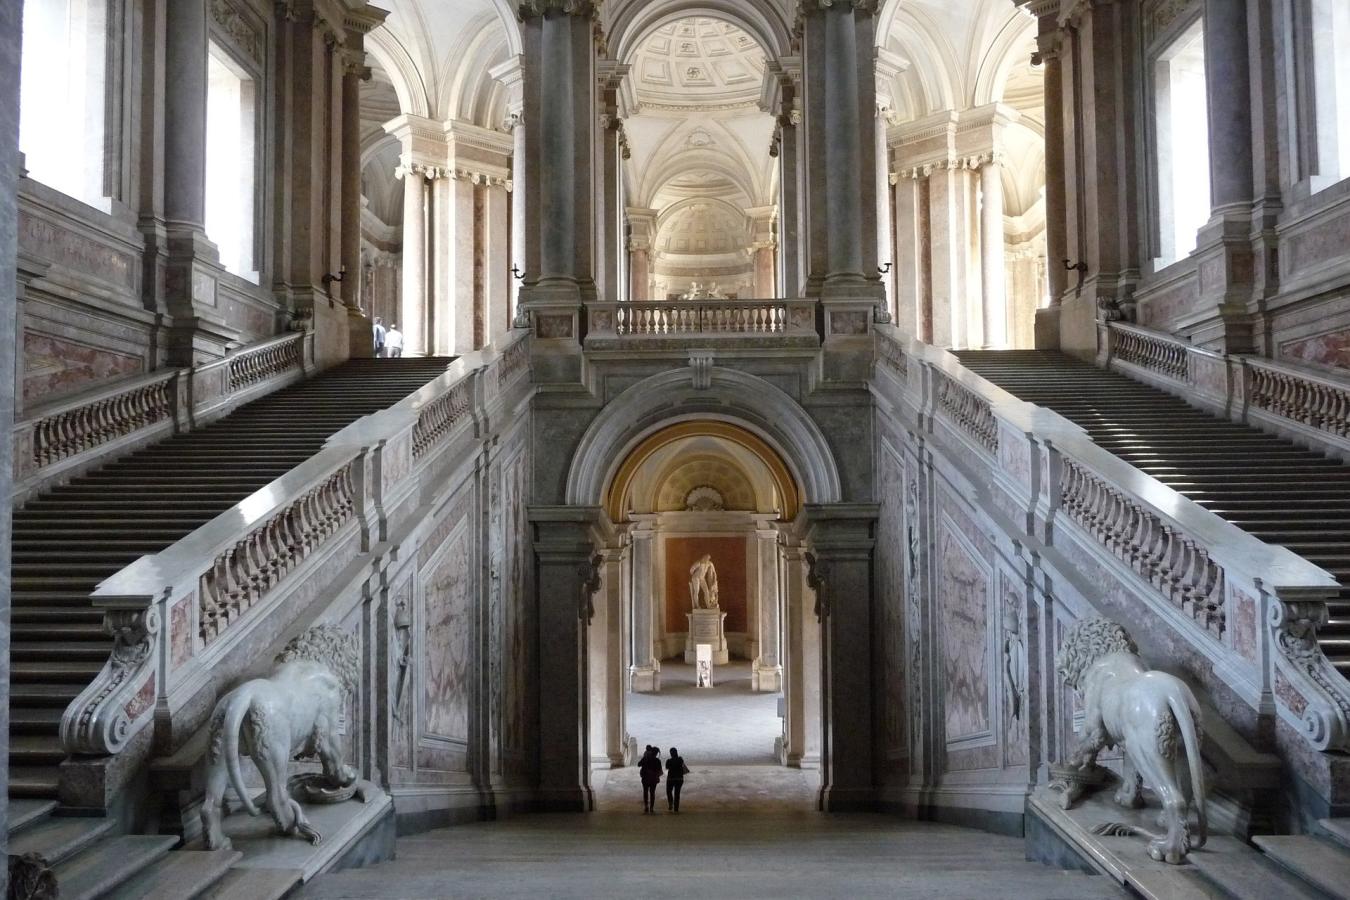 Naples-Royal Palace of Caserta (price starting from 350€)